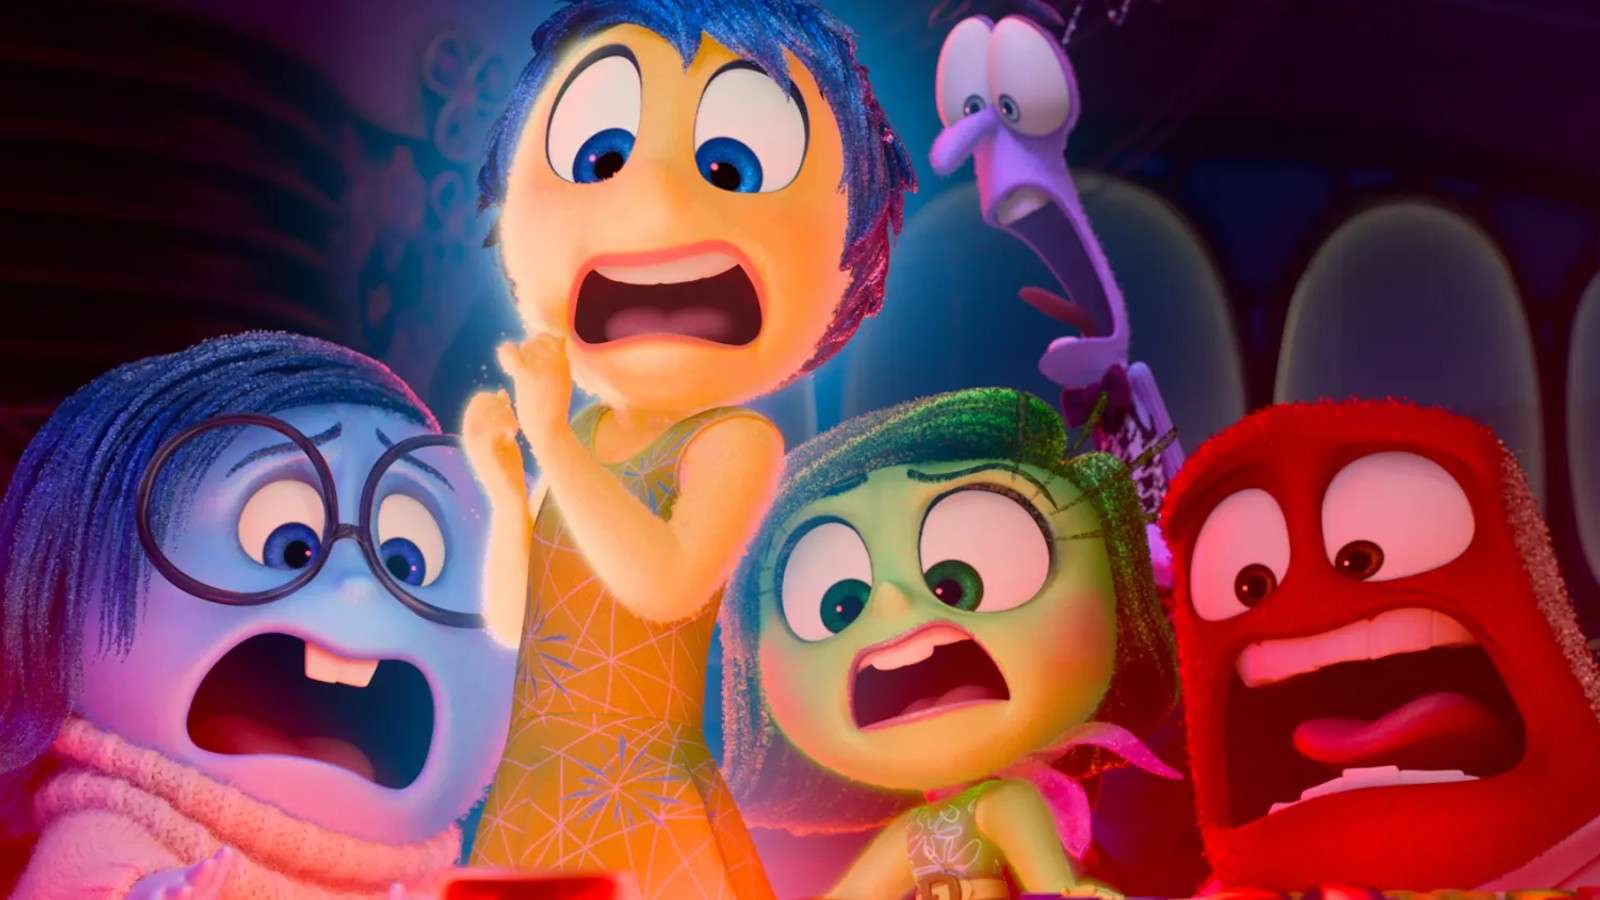 The heroes of Inside Out 2 look terrified.